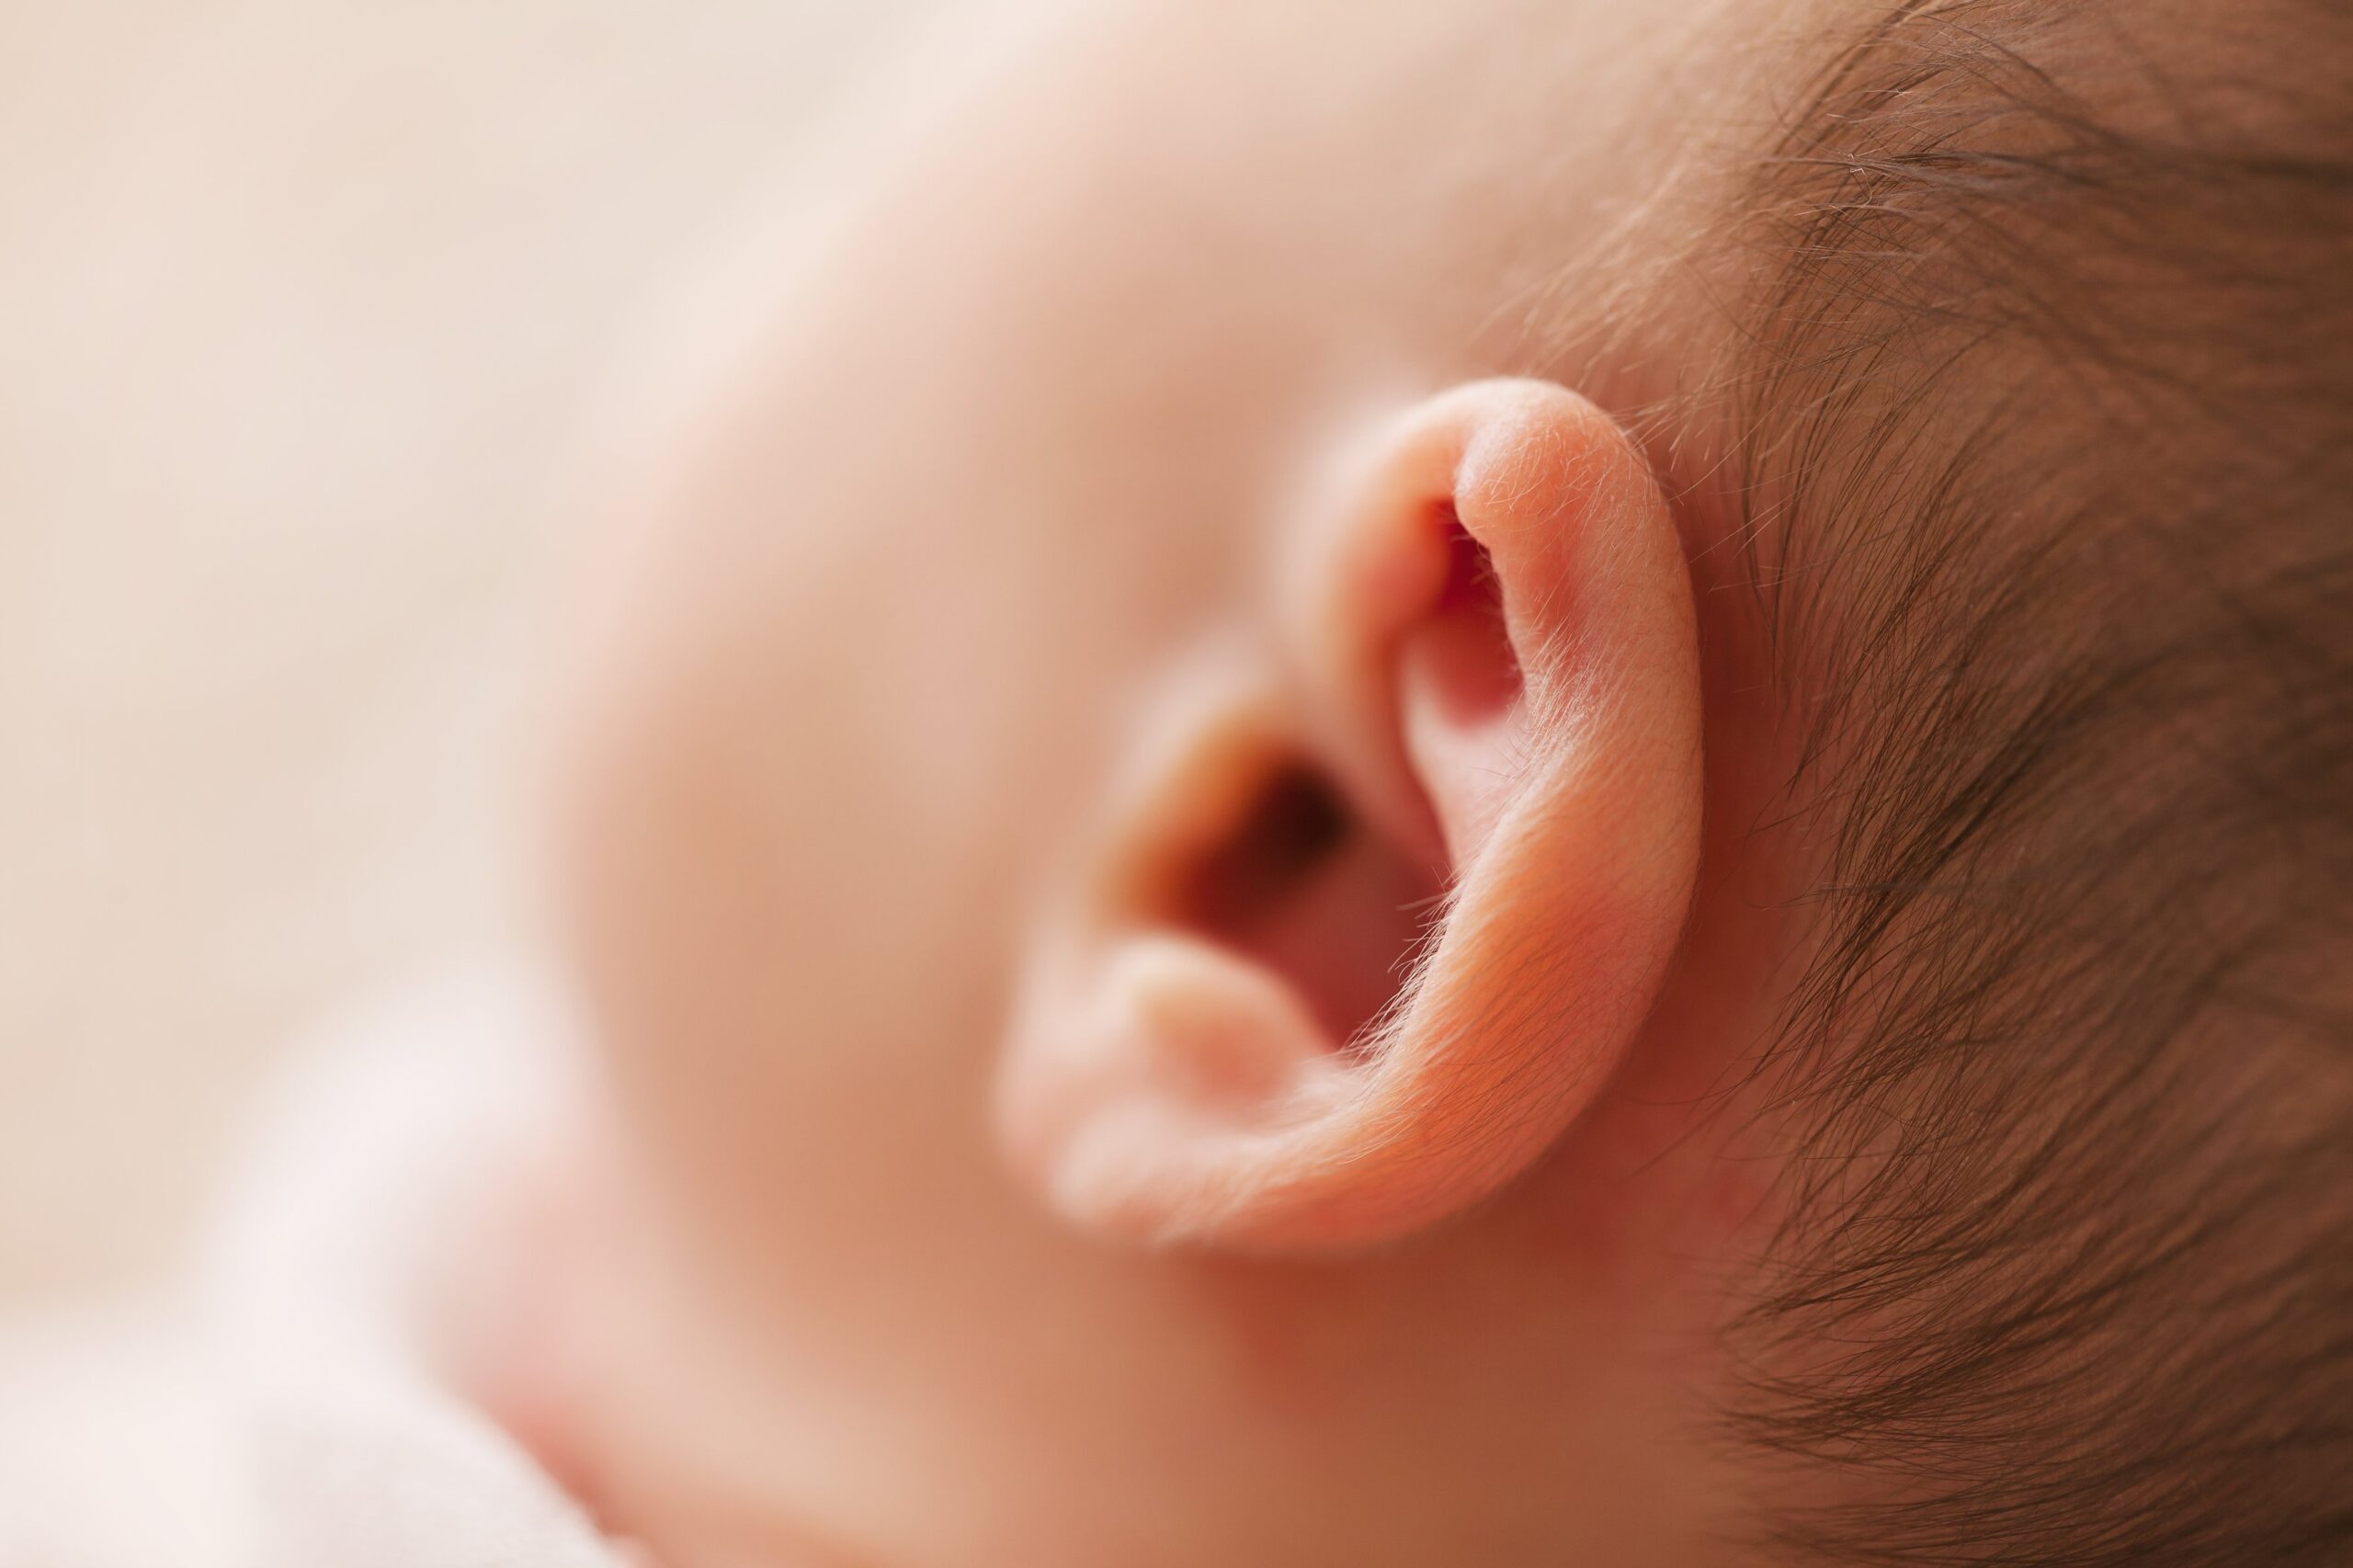 A close up of a baby's ear